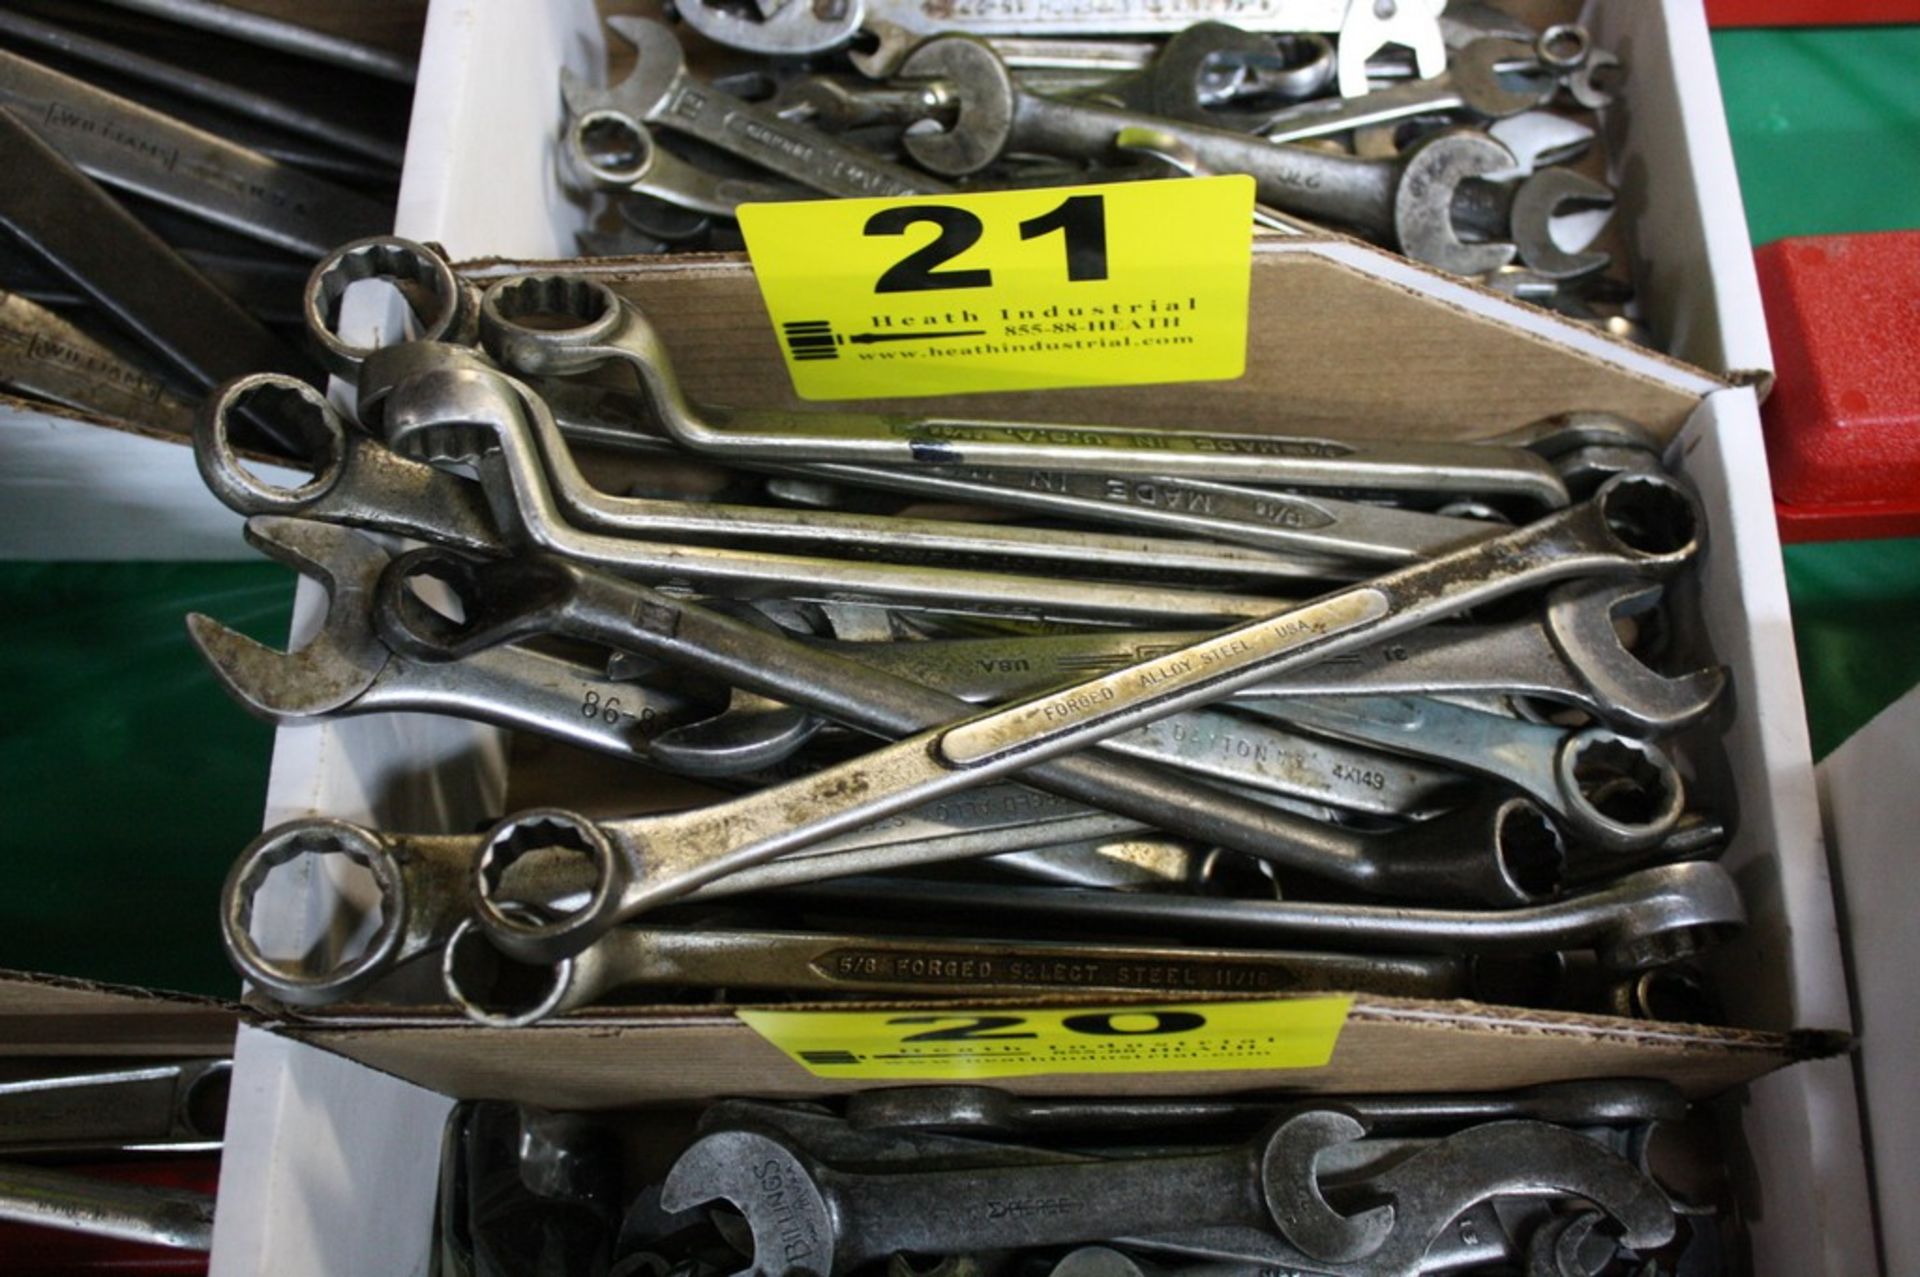 LARGE ASSORTMENT OF OPEN/CLOSED END WRENCHES IN BOX